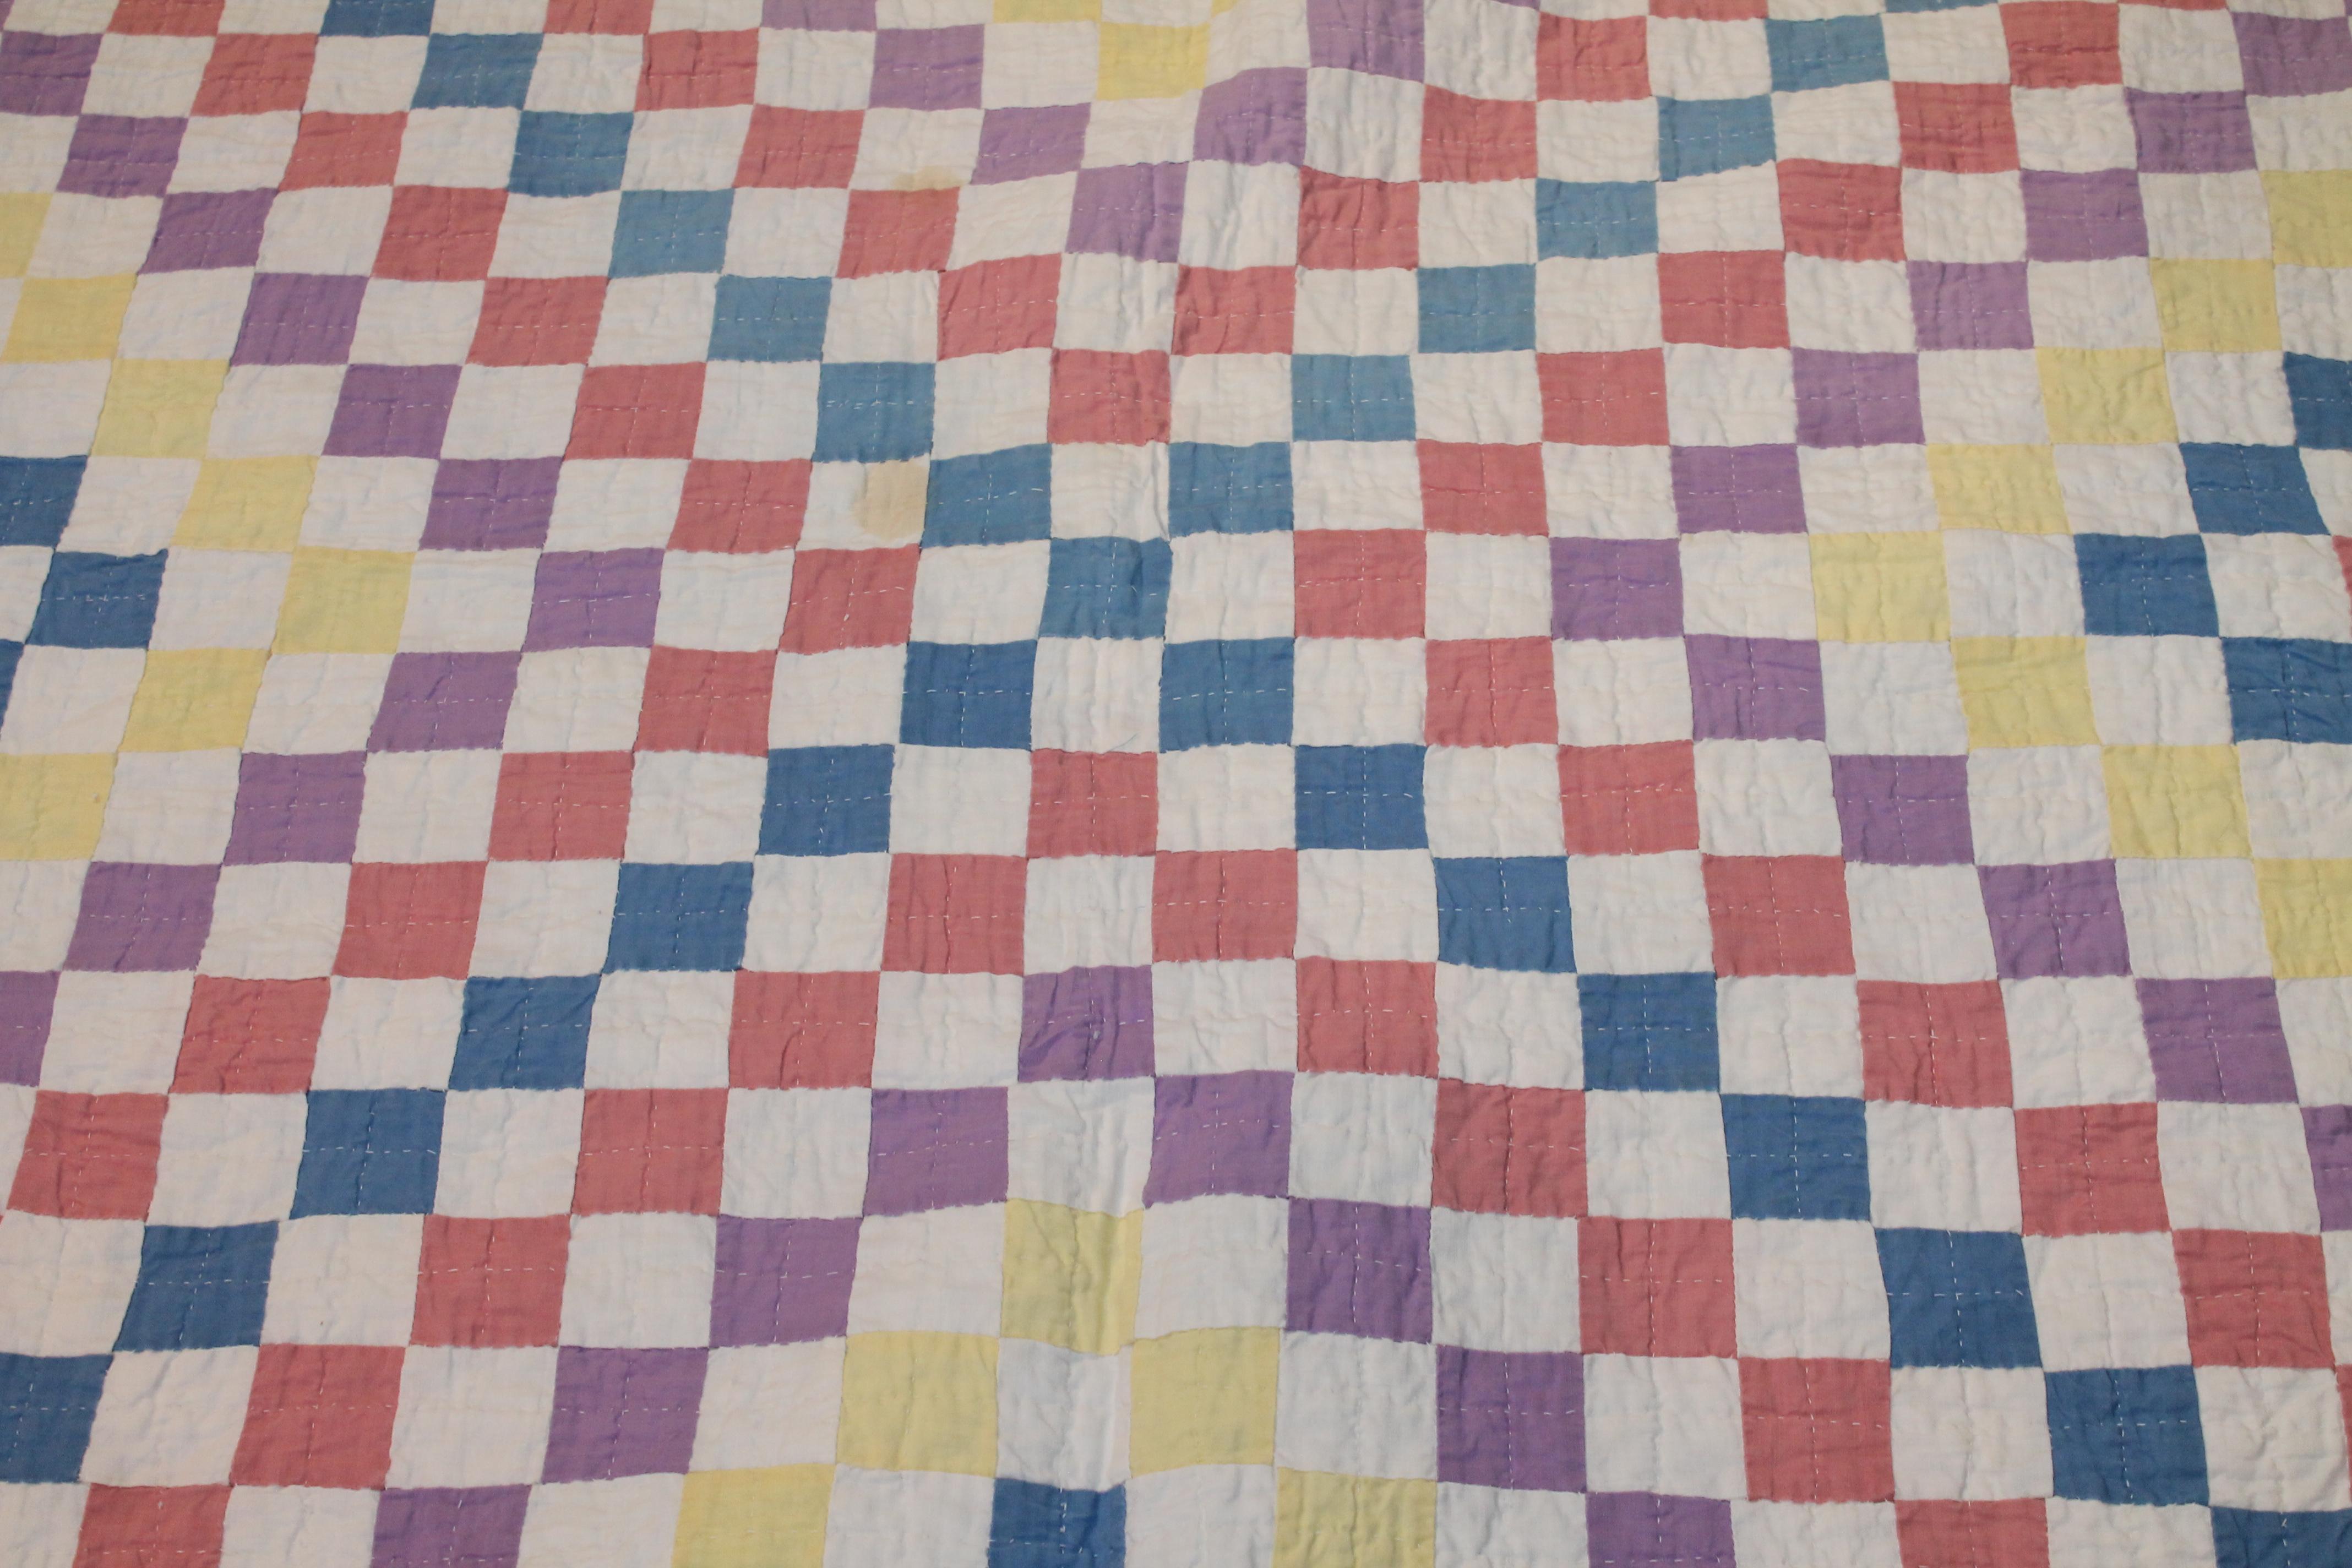 This pastel postage stamp quilt is such an unusual pattern and fine barber pole sliding border. The condition is very good and minor fade on one edge or border to the right of the photo.